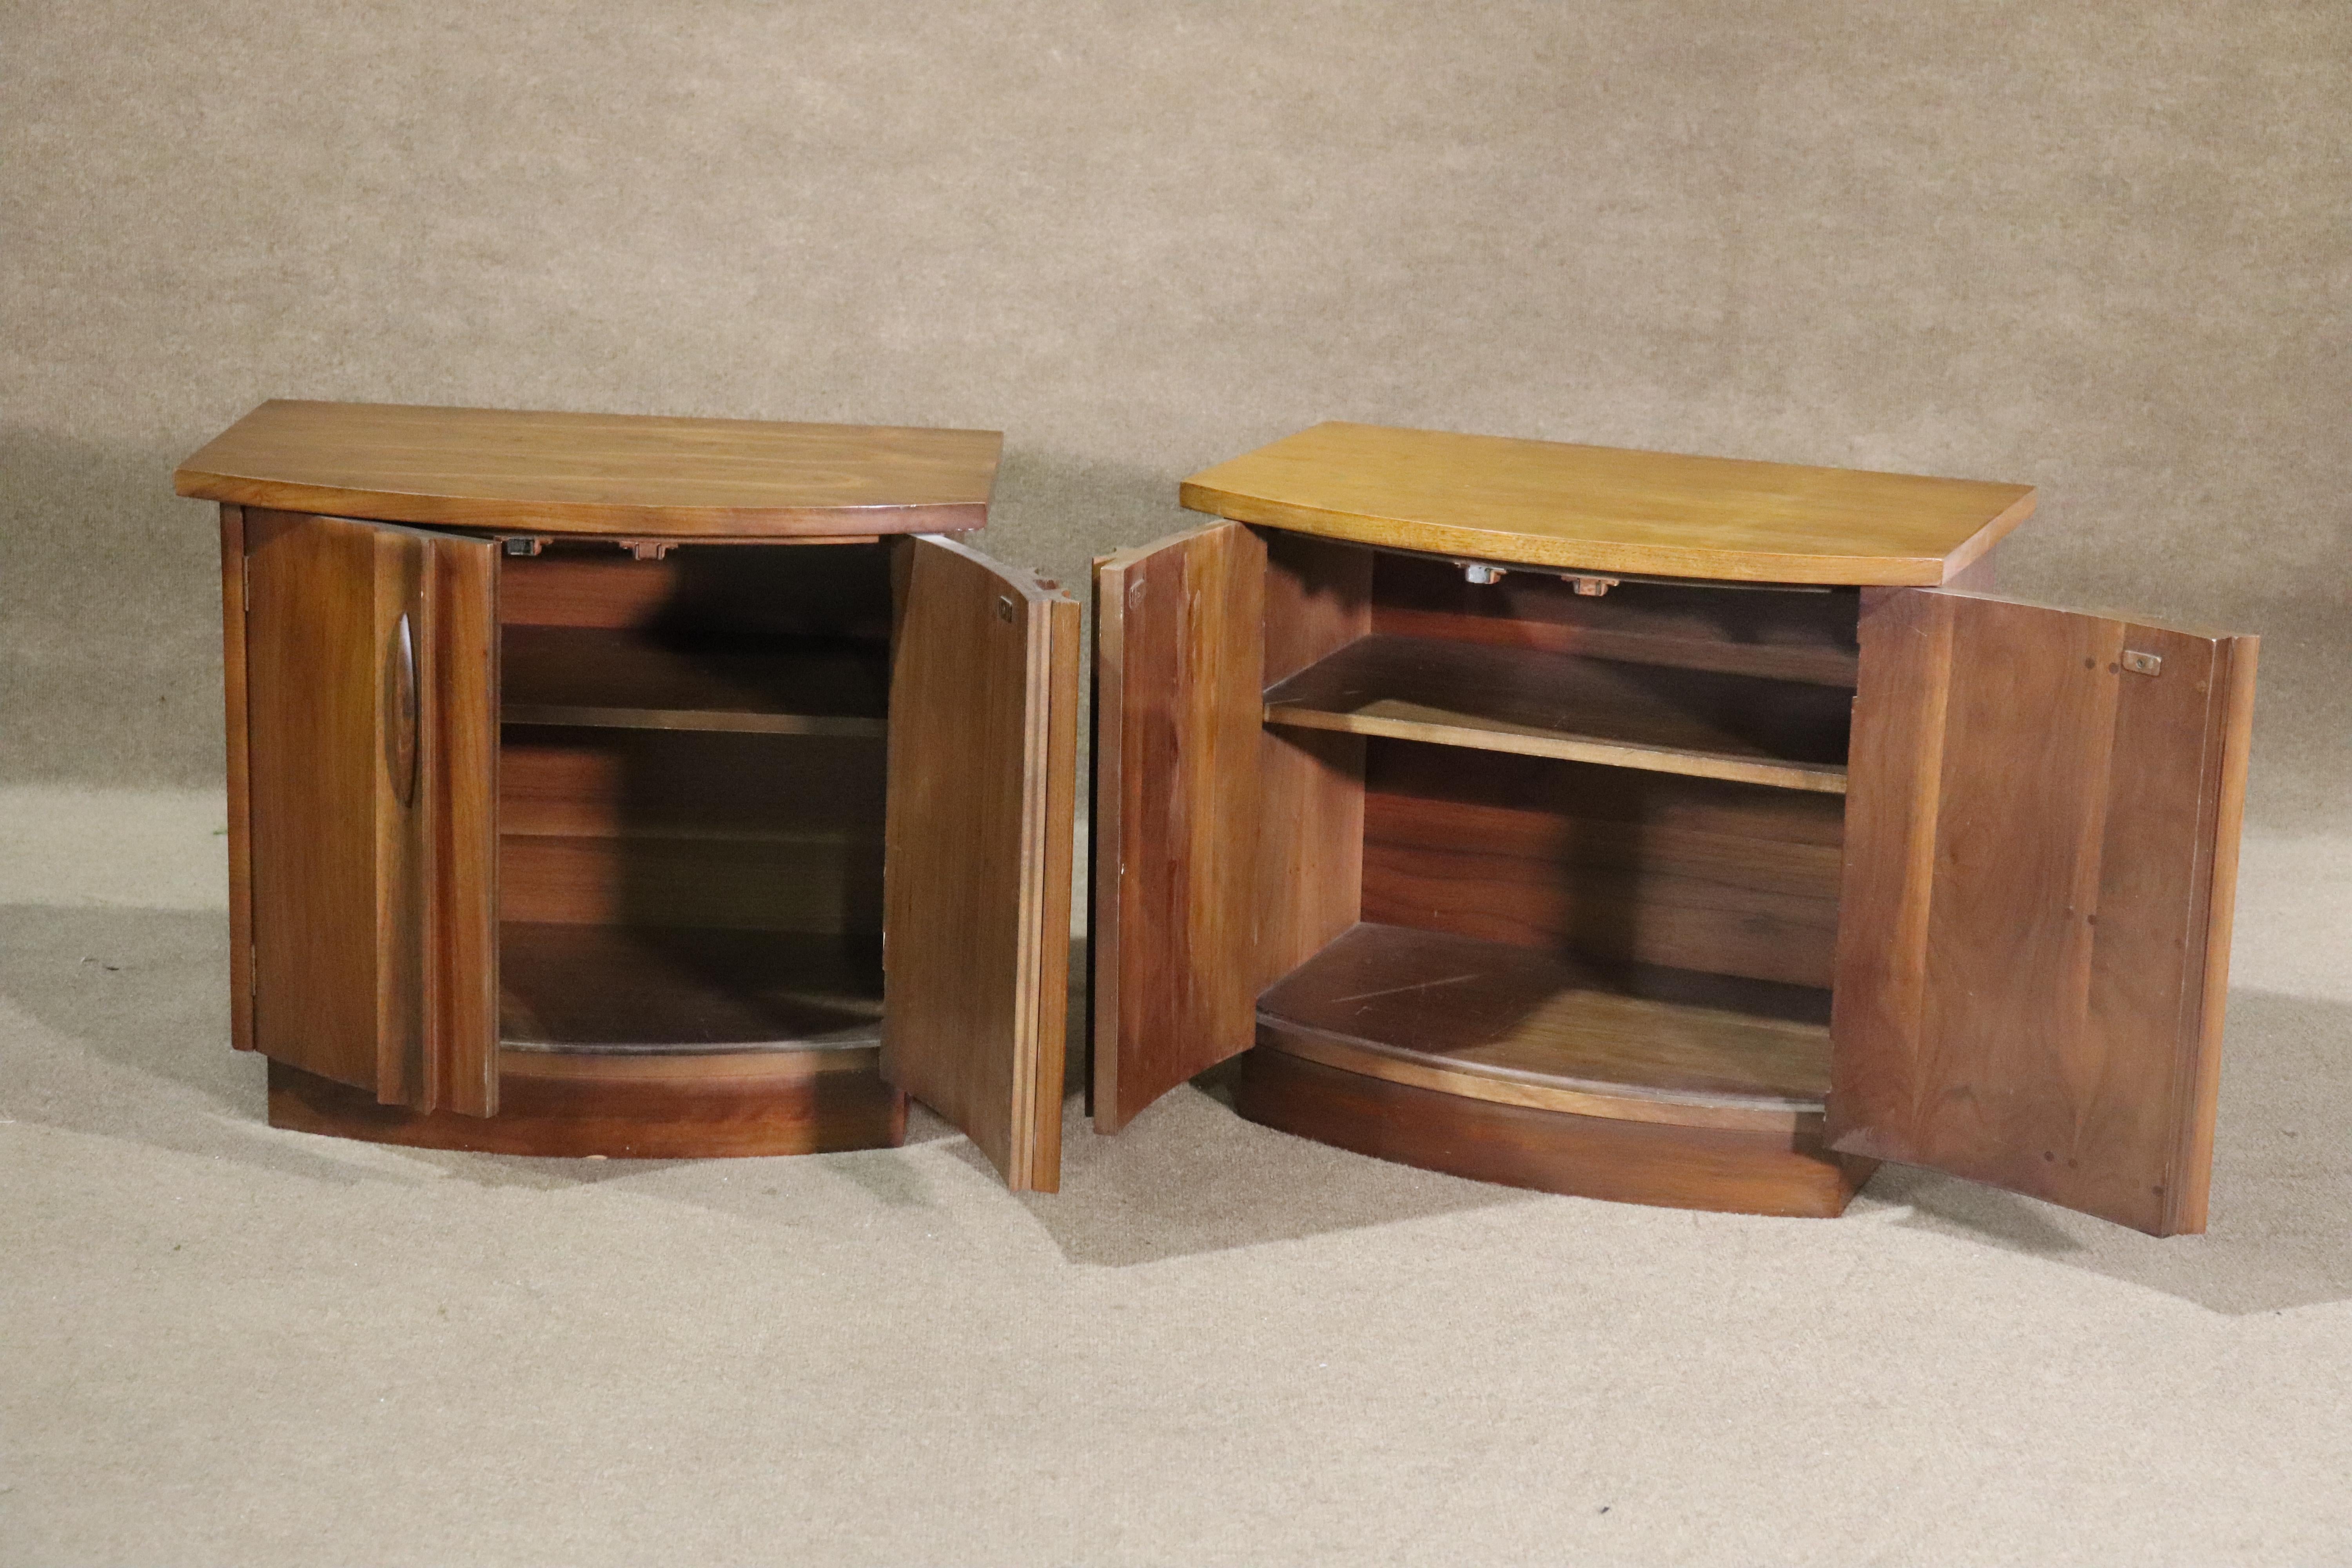 Pair of mid-century modern nightstands by Thomasville. Two door storage with sculpted fronts and walnut grain.
Please confirm location NY or NJ